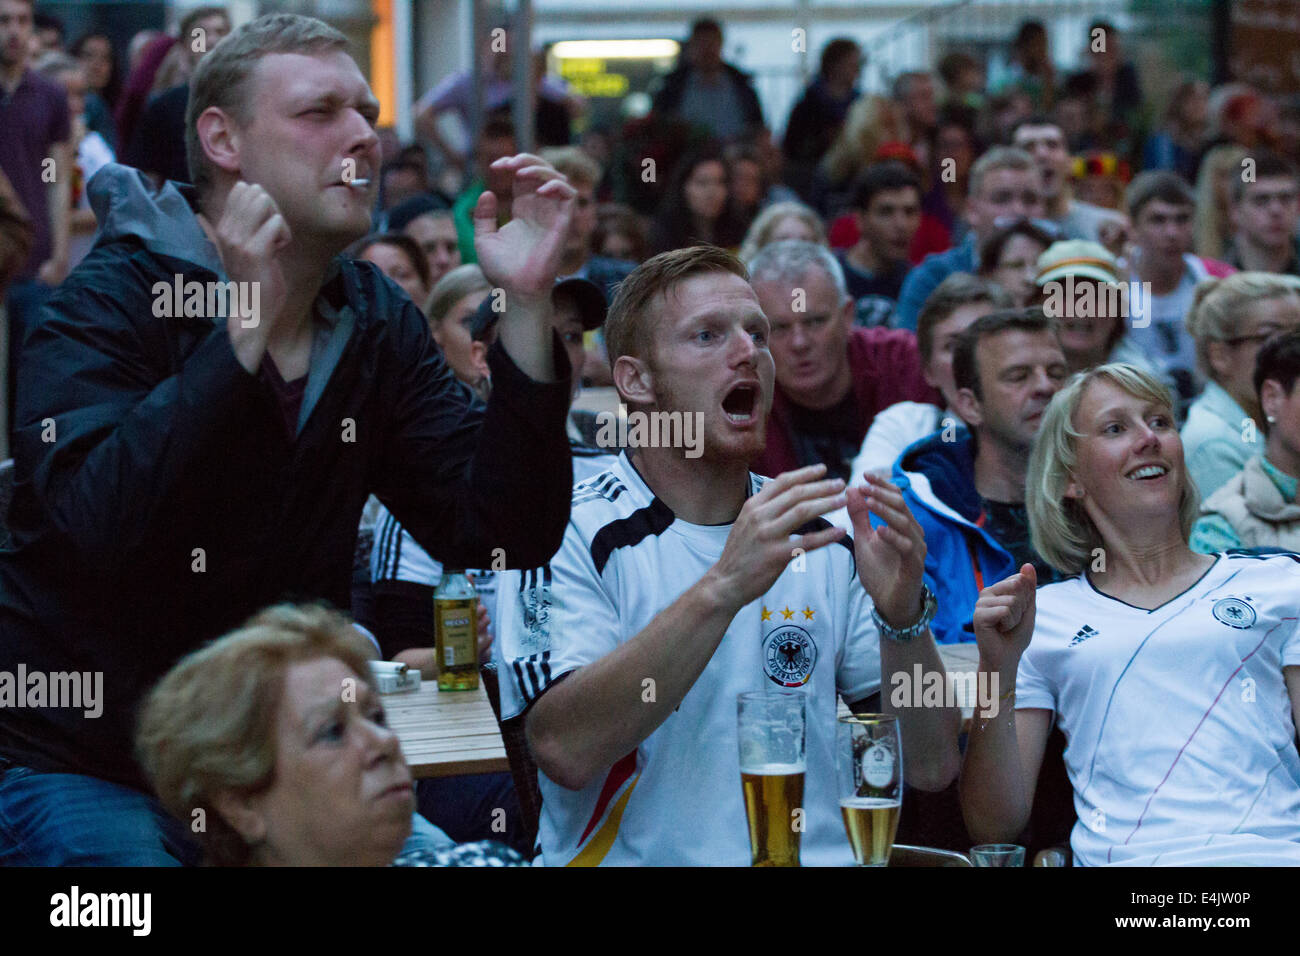 German football fans watch on a large screen outside a cafe as their team come close to scoring. Credit:  Gruffydd Thomas/Alamy Live News Stock Photo